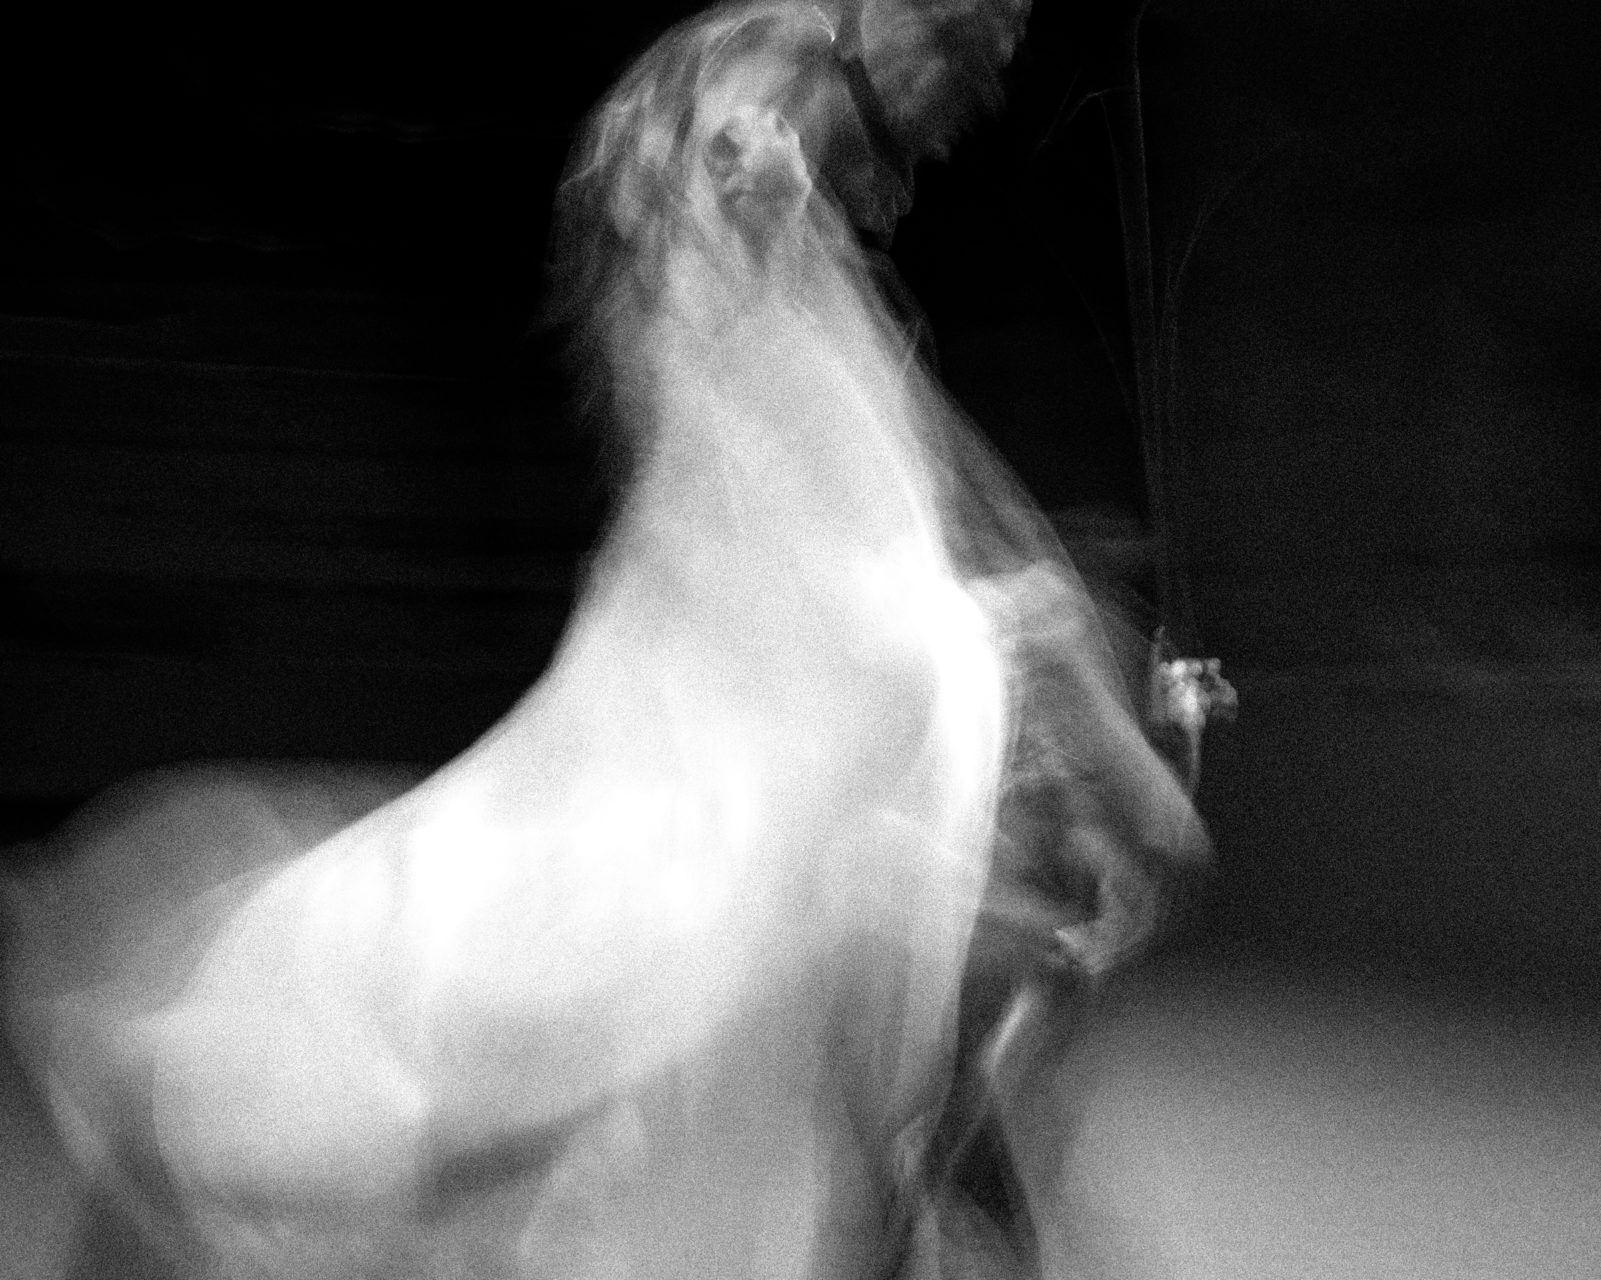 dancing with horses